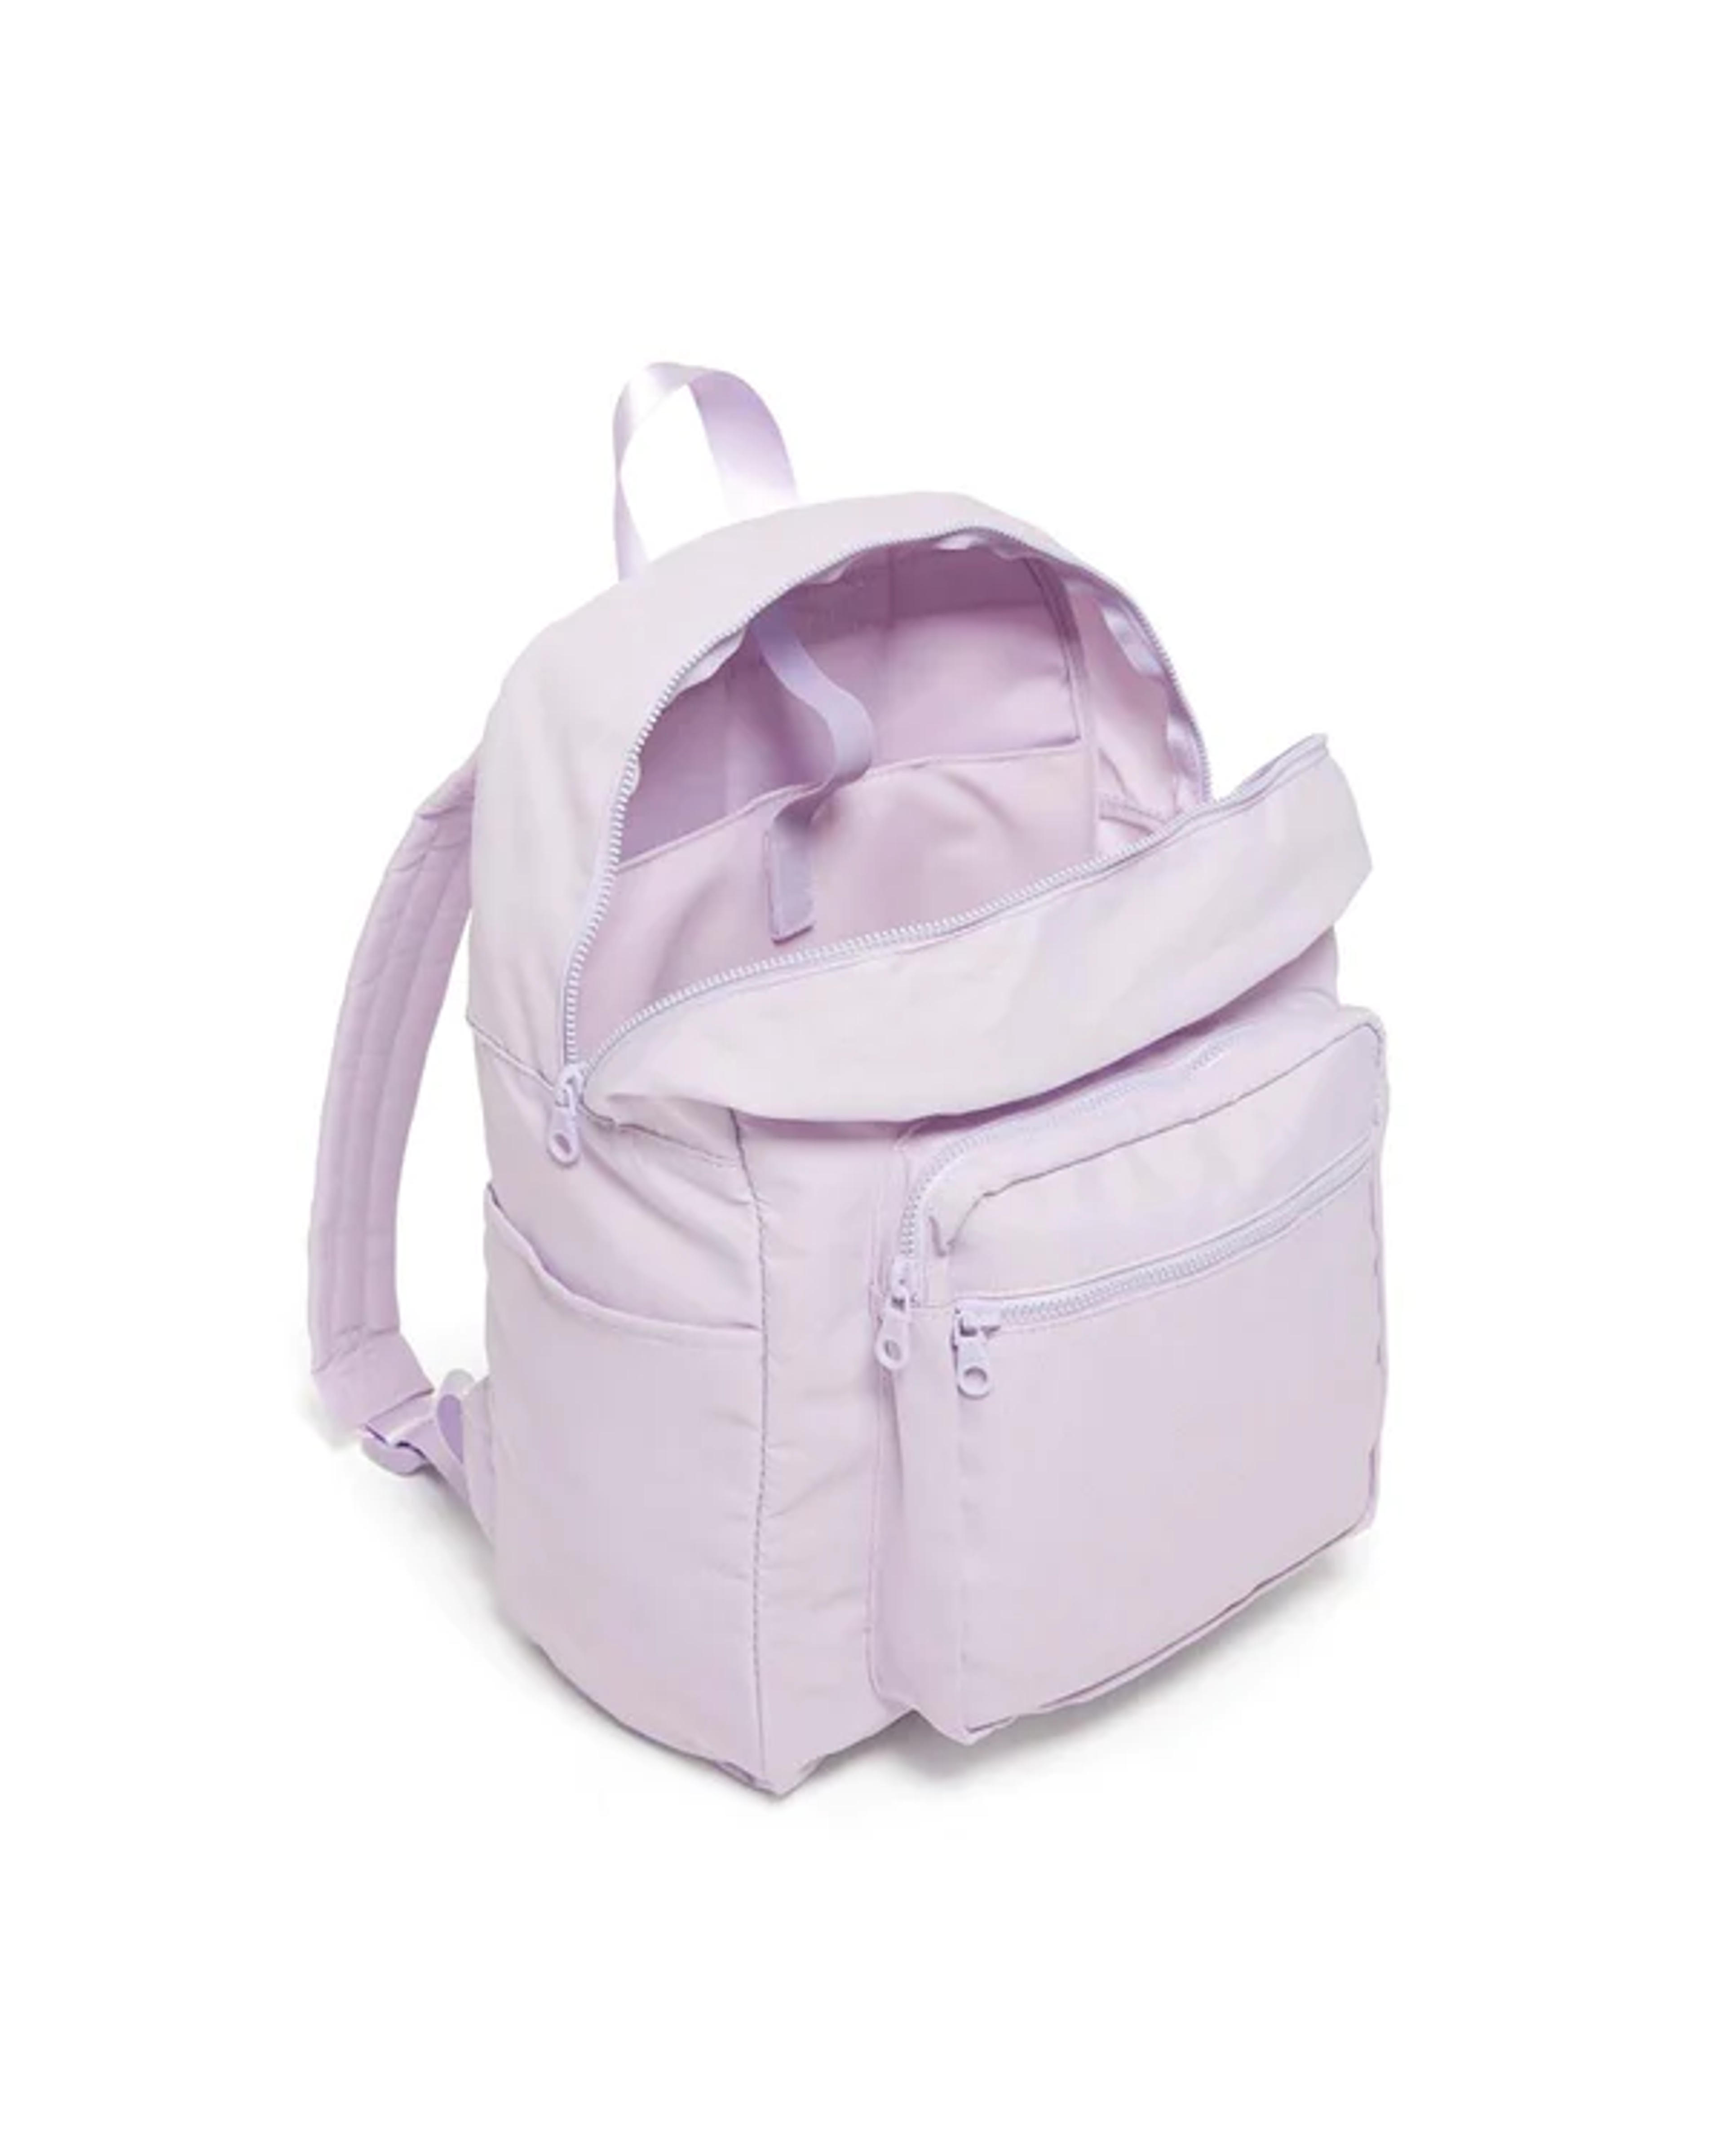 This Go-go Backpack comes in a soft lilac purple.